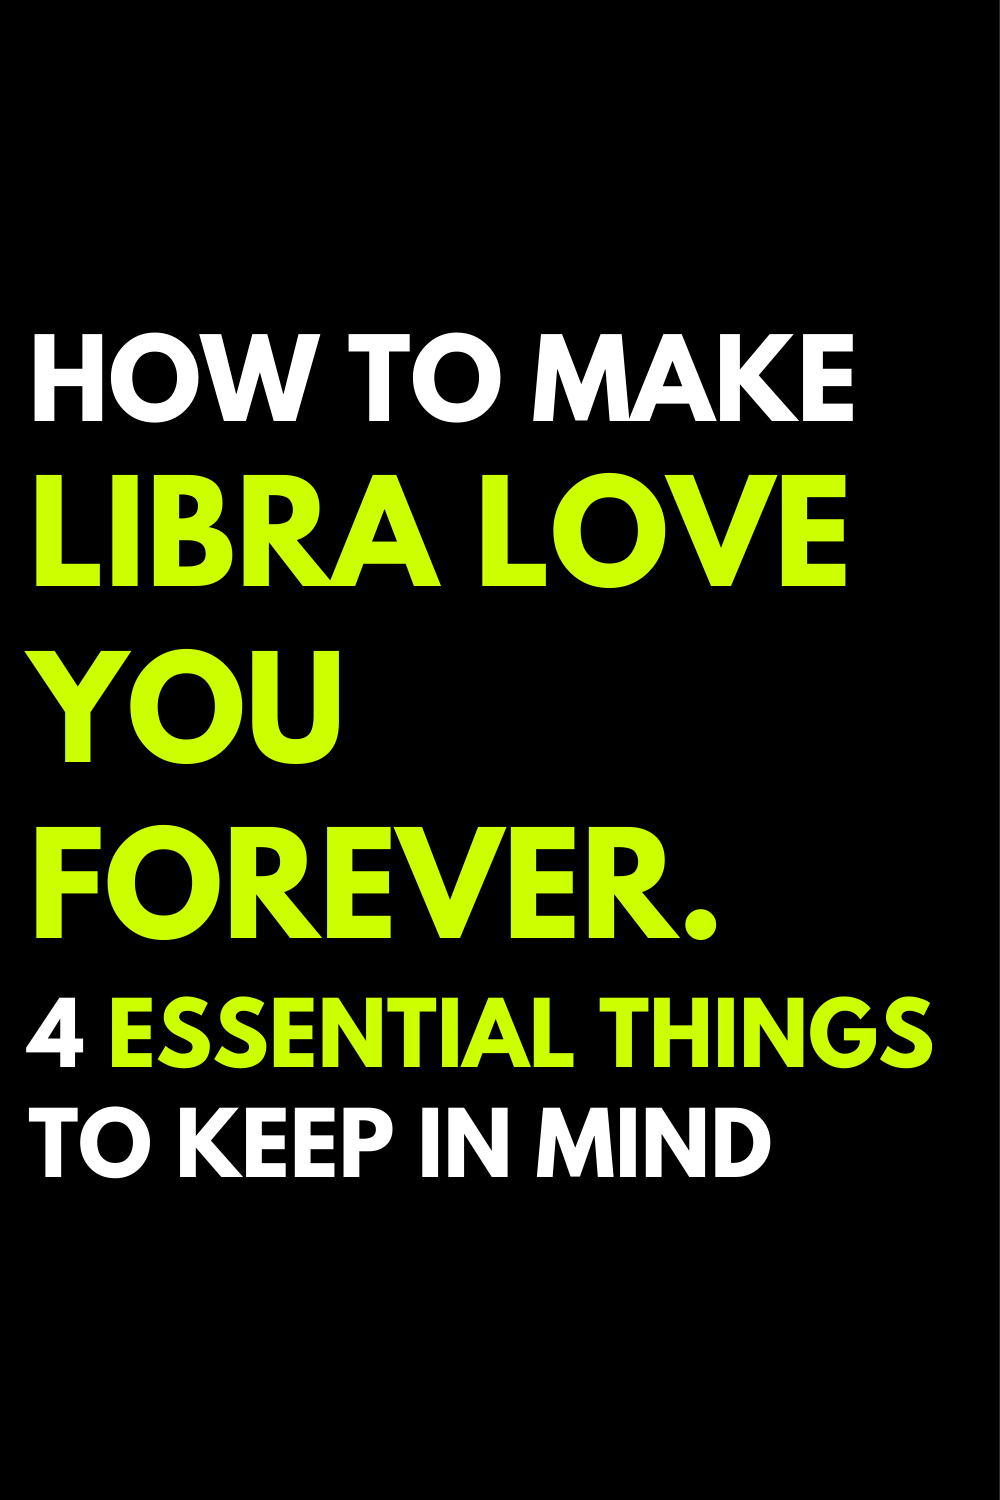 How to make Libra love you forever. 4 essential things to keep in mind